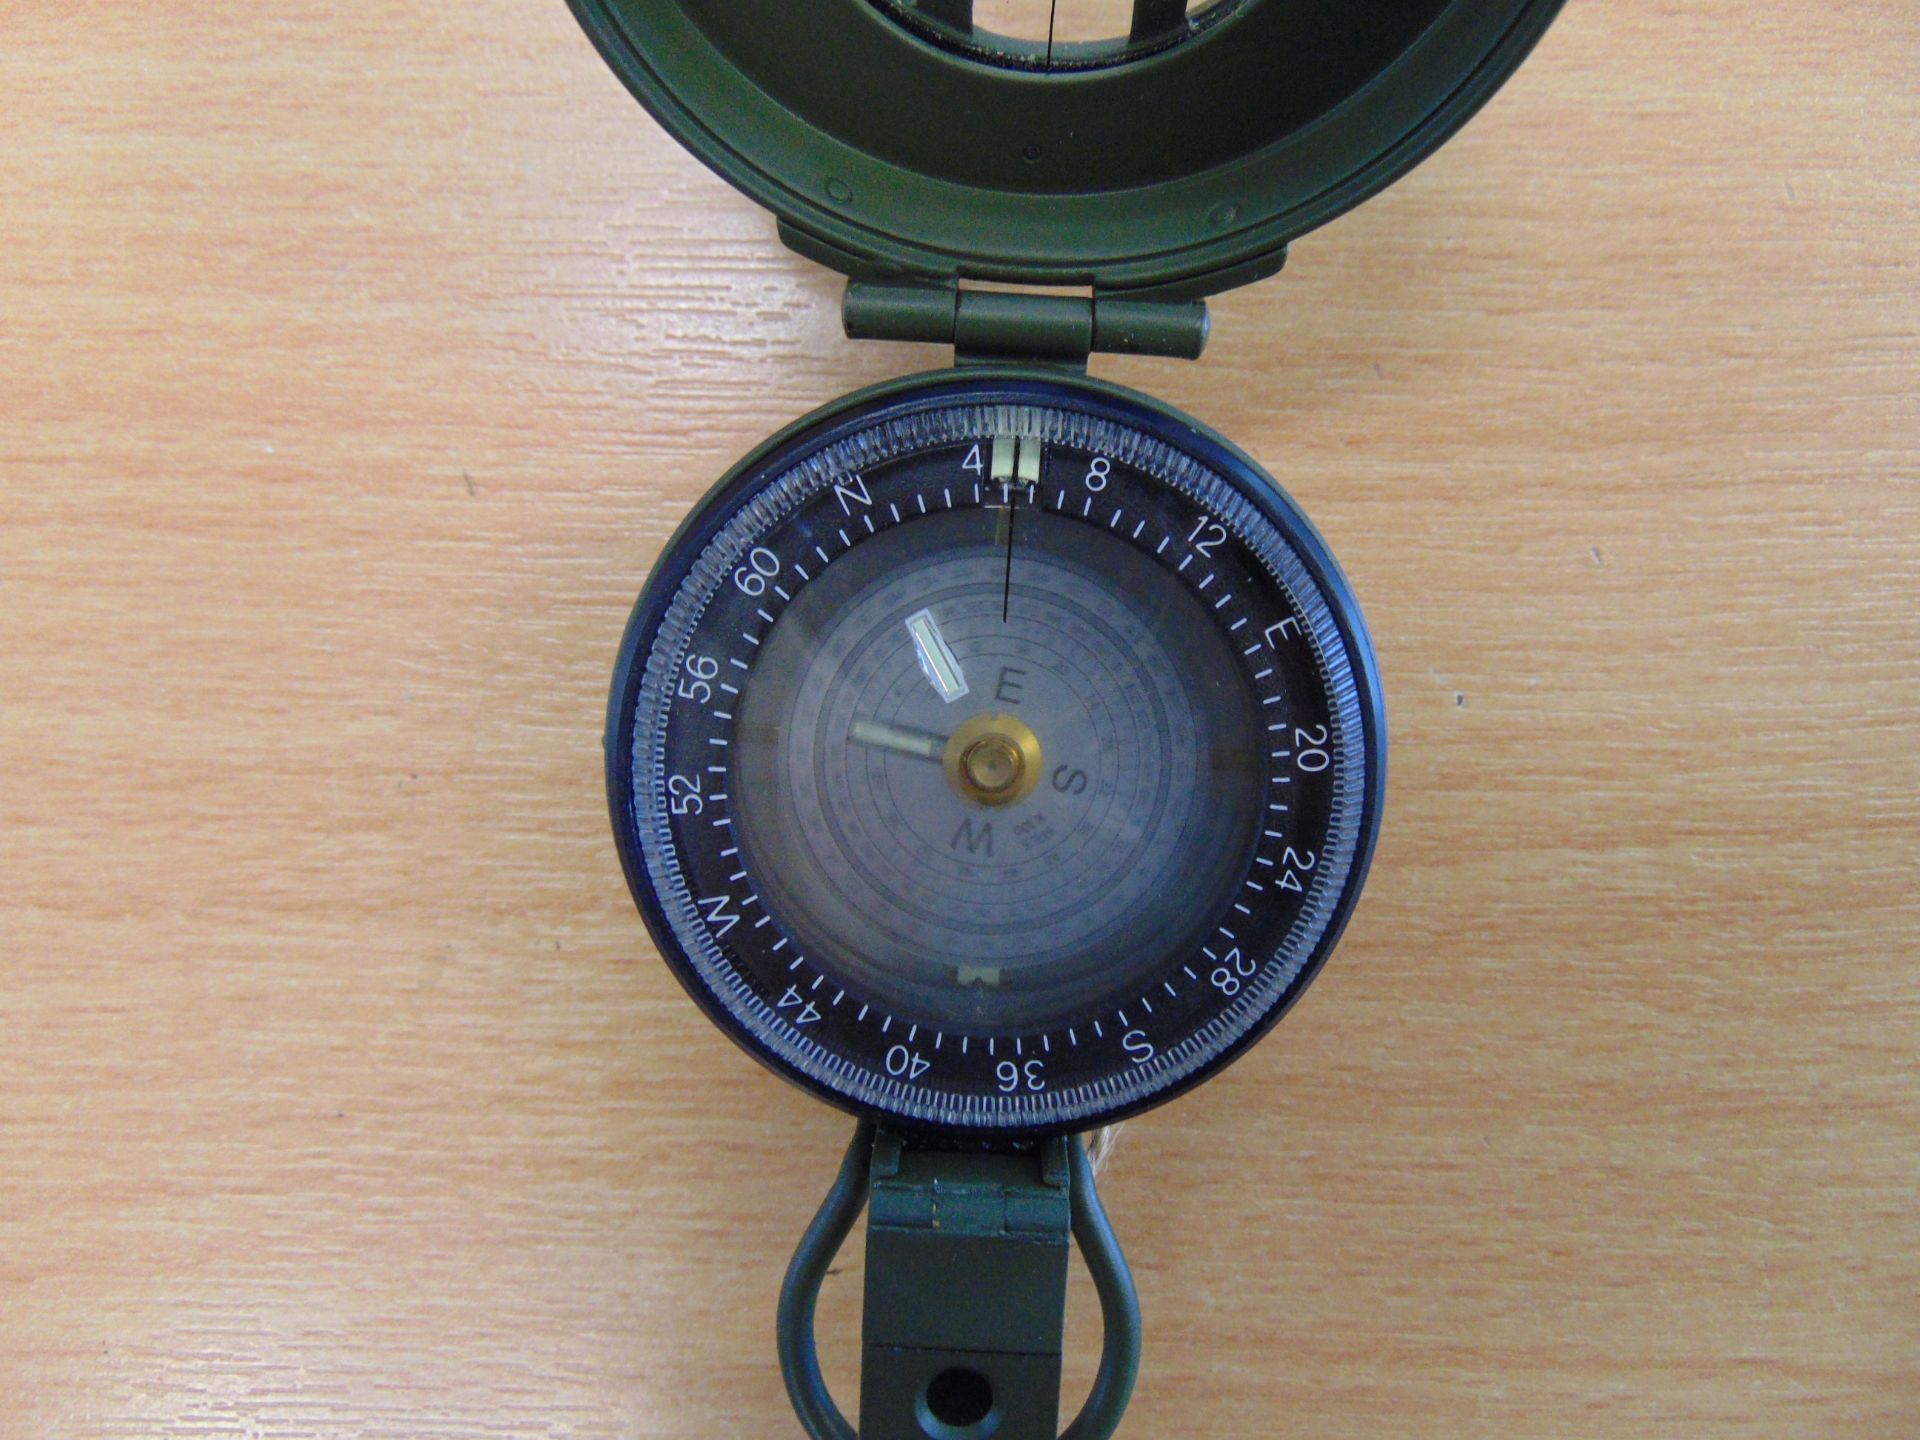 New Unissued Francis Barker M88 British Army Compass - Image 3 of 4